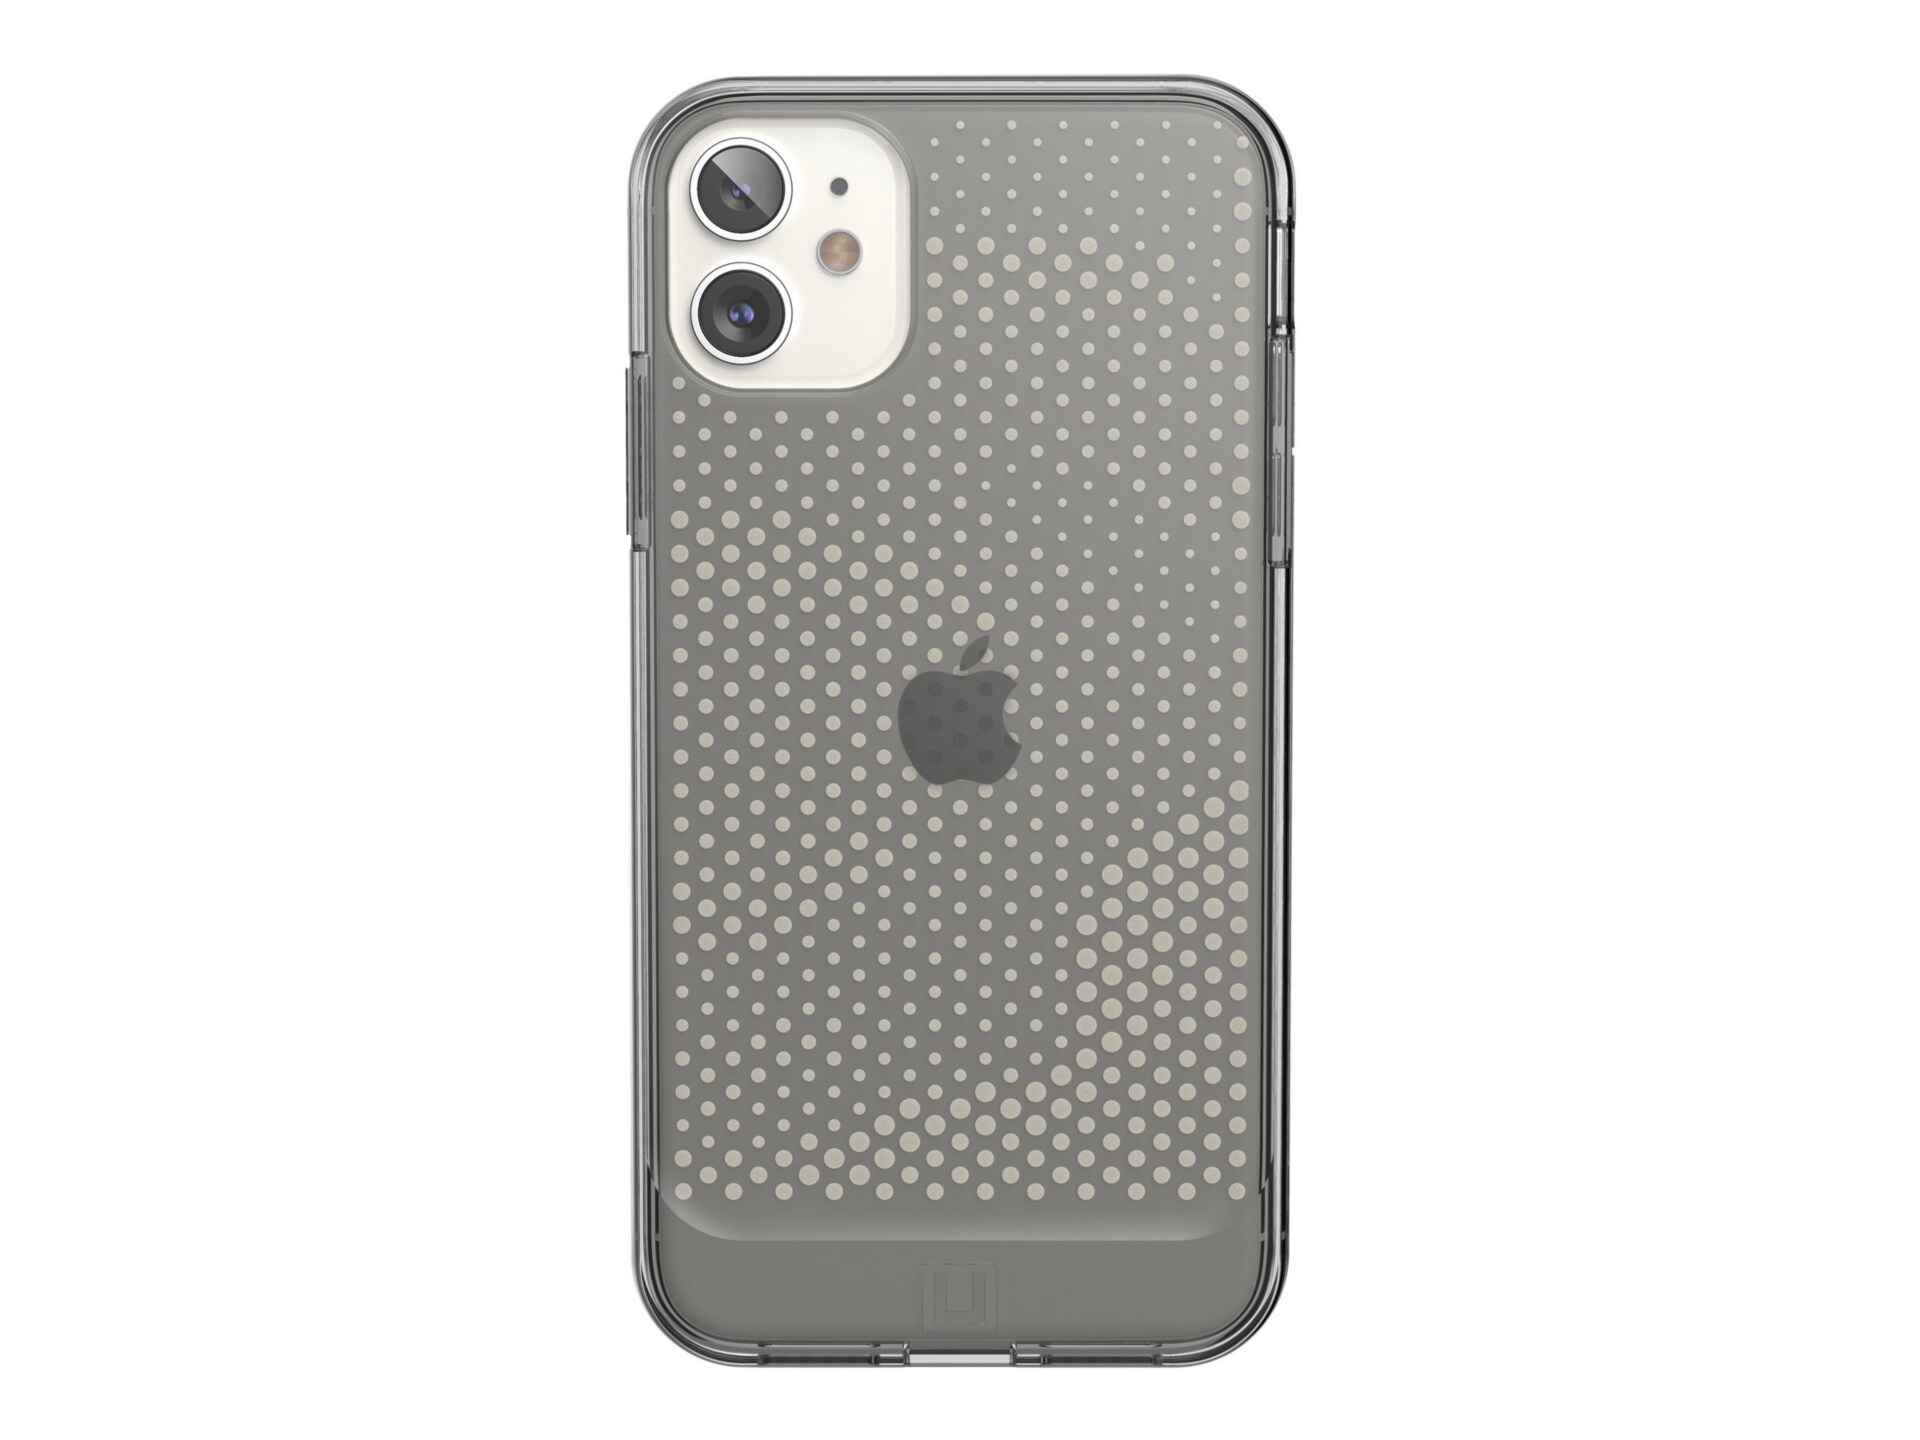 [U] Protective Case for iPhone 11 / iPhone XR [6.1-inch] - Lucent Ash - bac